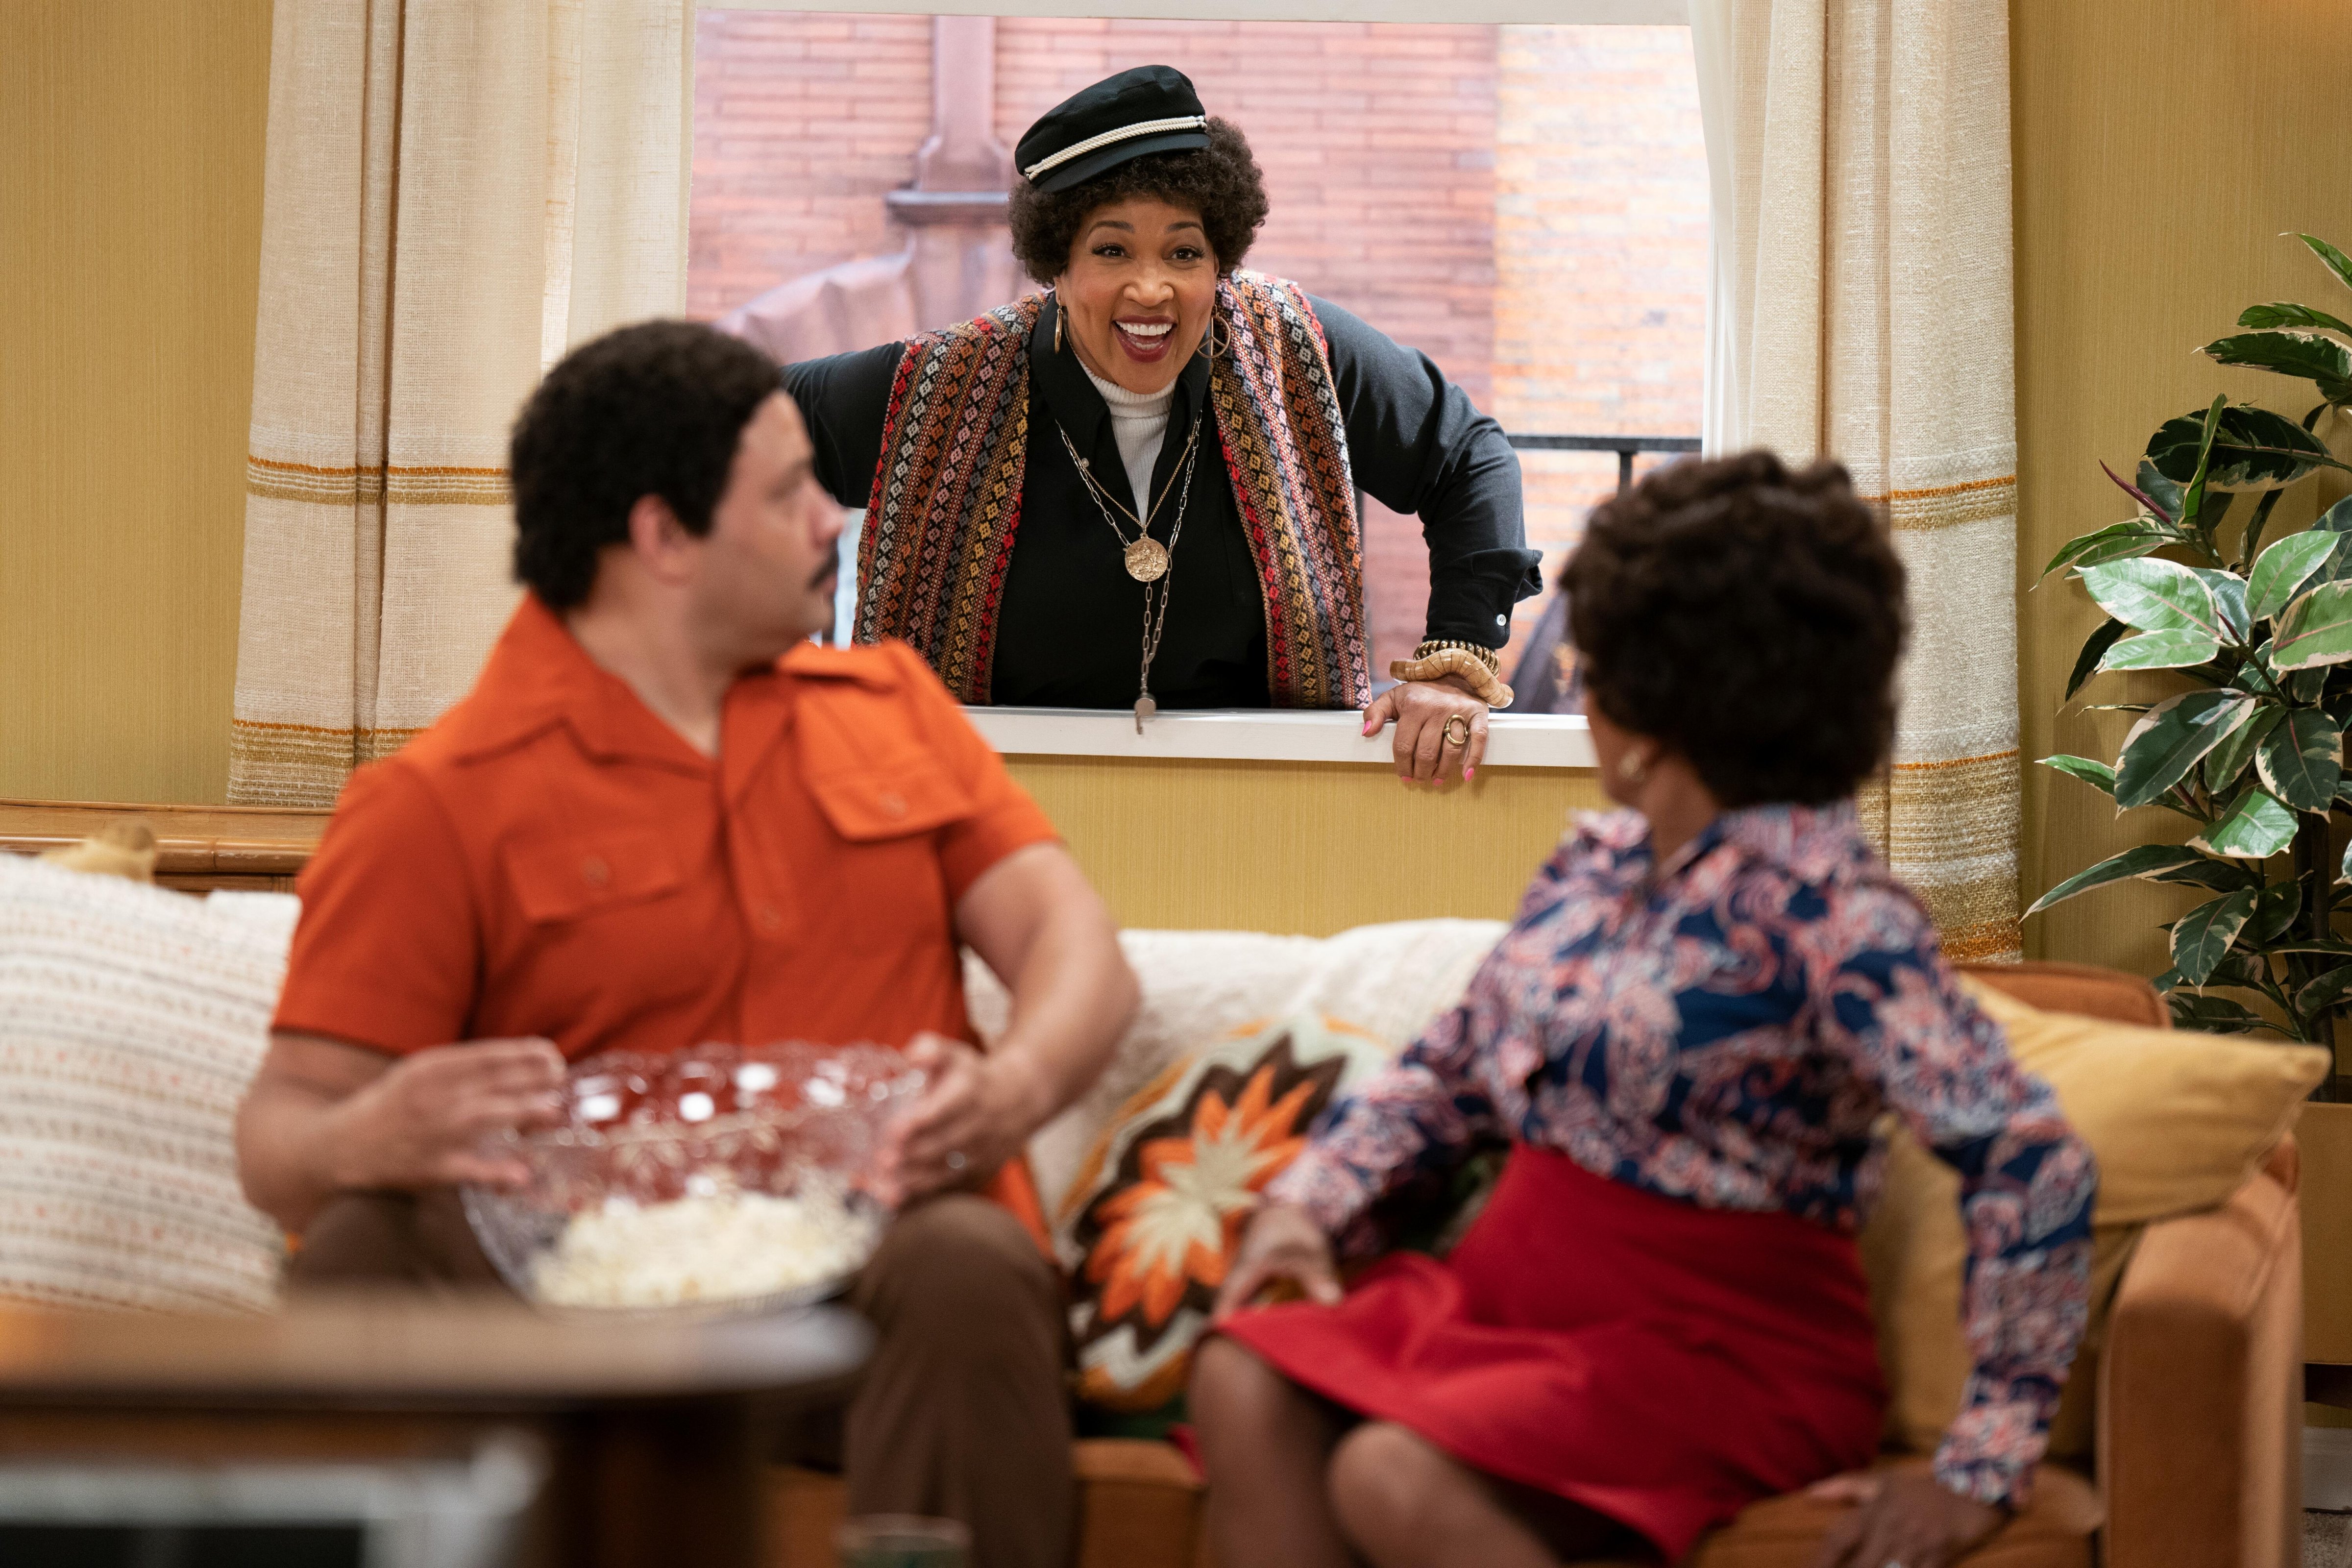 From left: Colton Dunn, Kym Whitley, and Wanda Sykes in <i>History of the World, Part II</i> (Tyler Golden—Hulu)